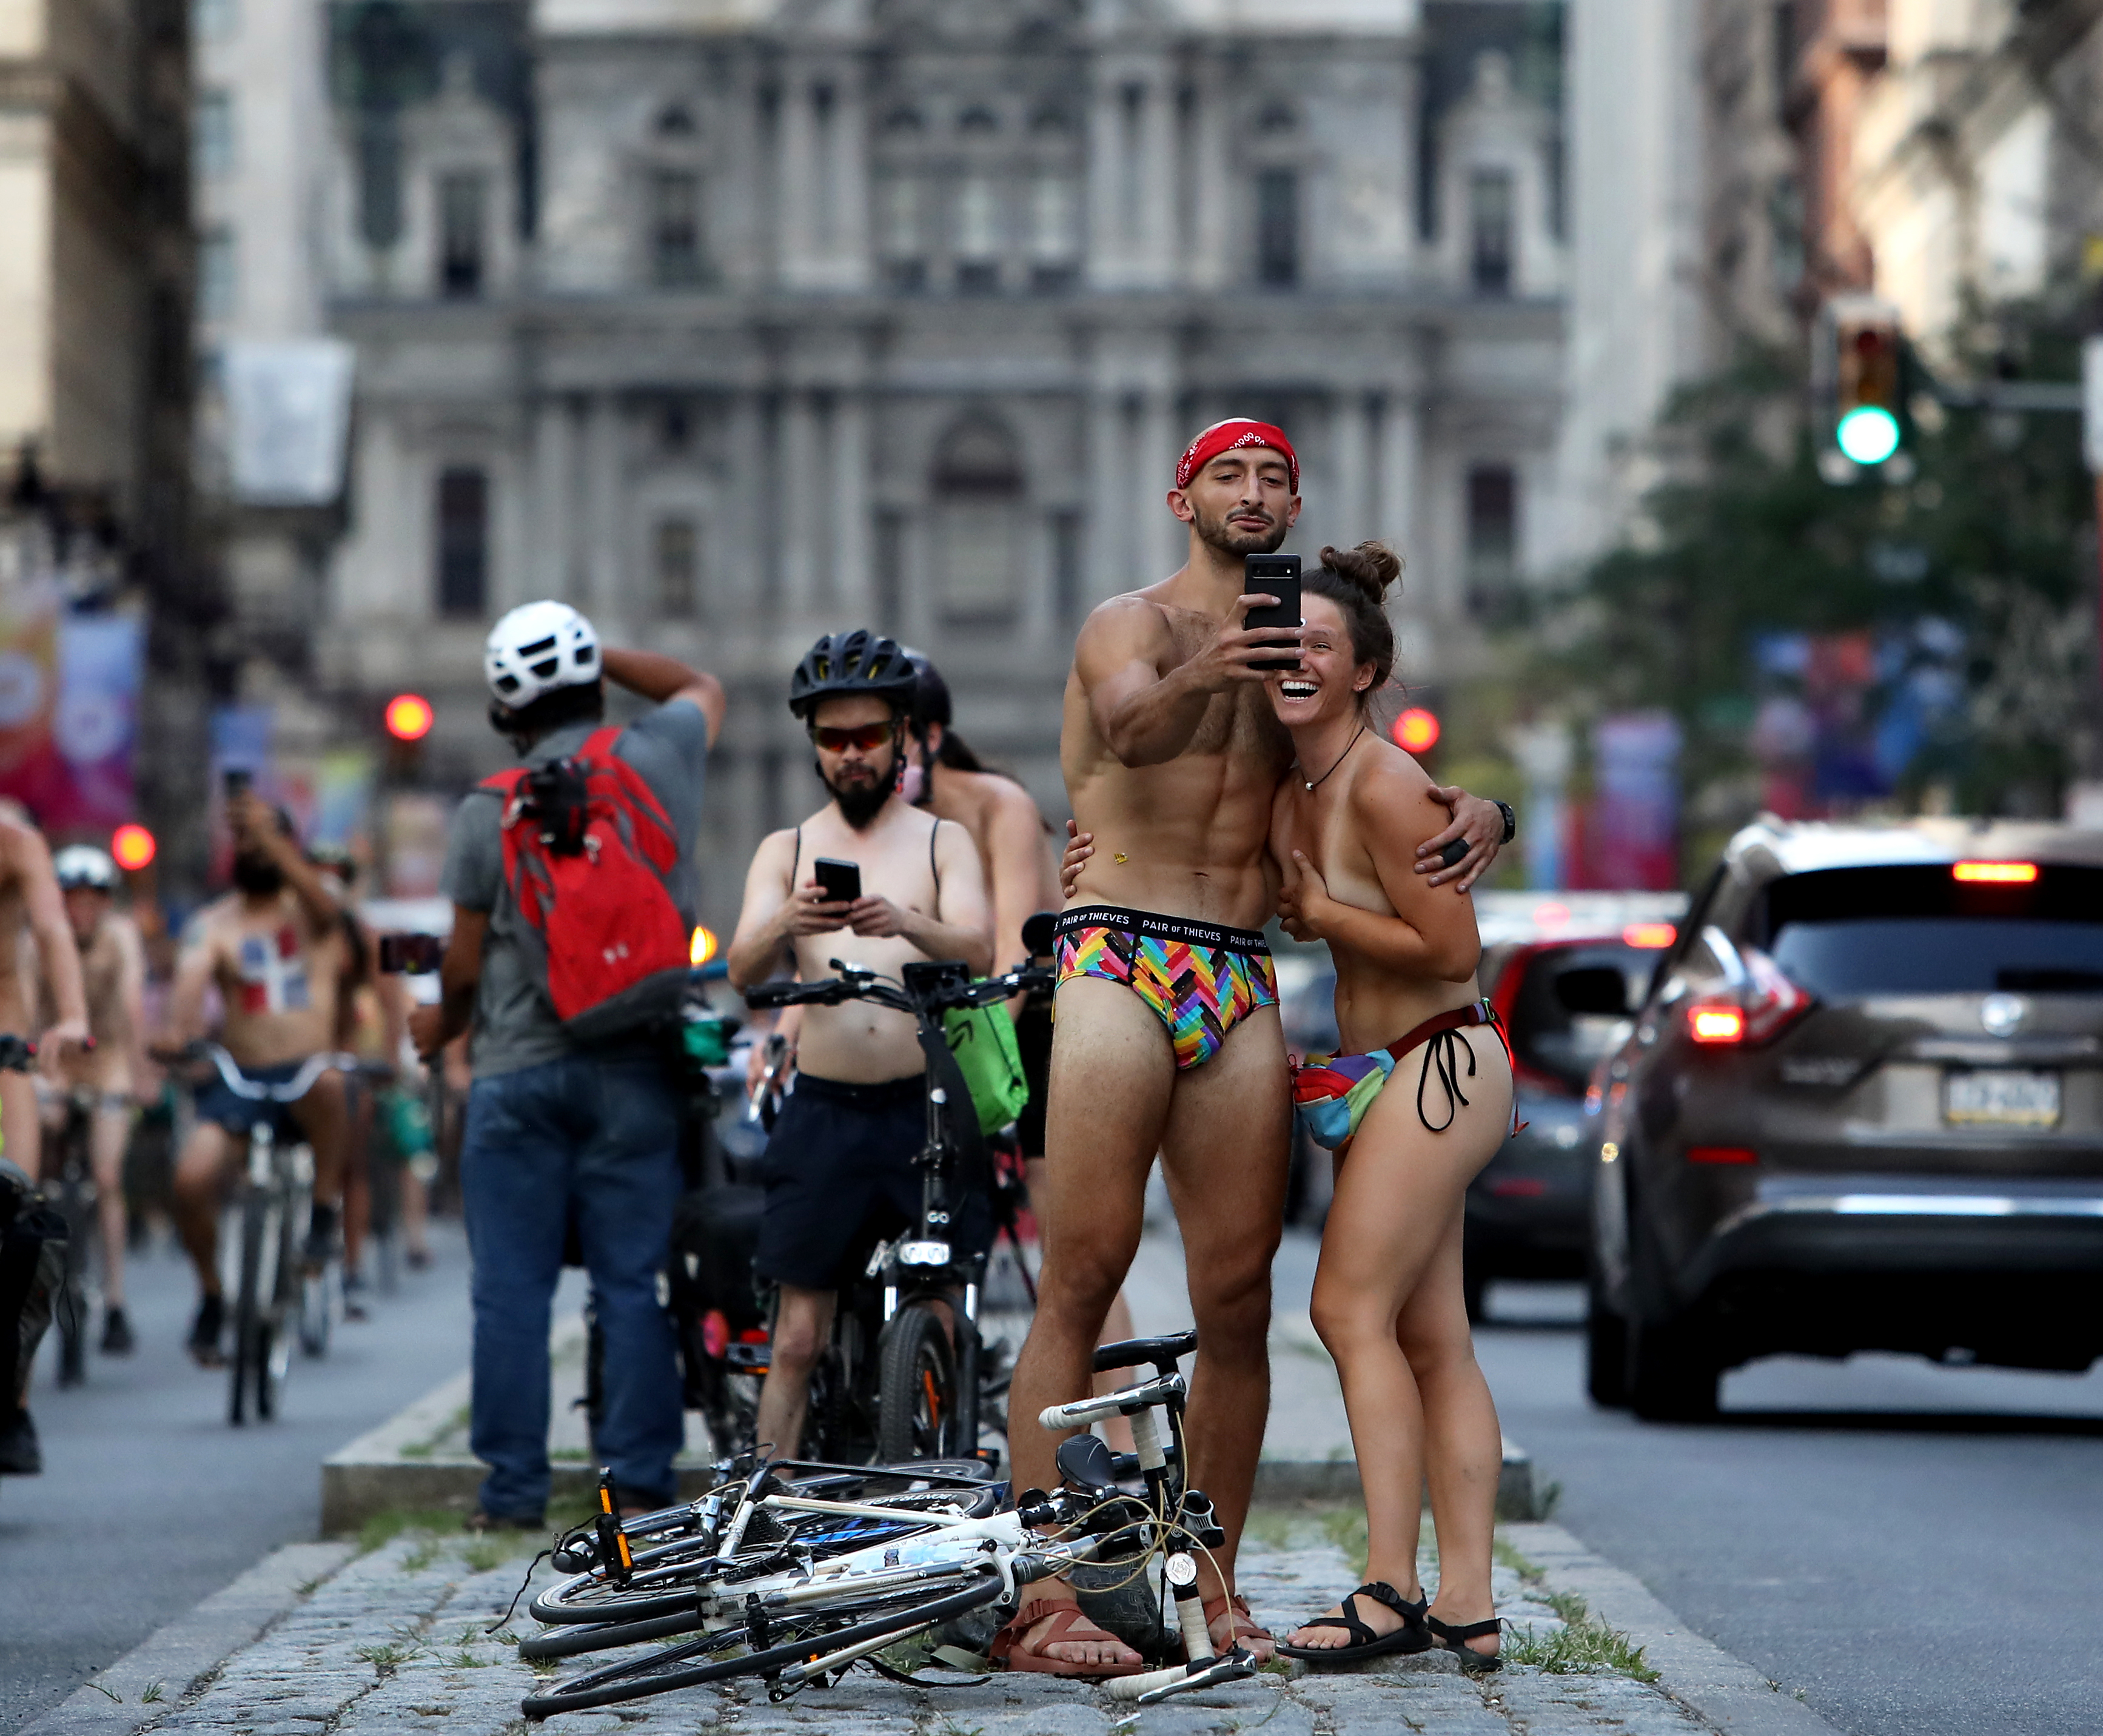 Philly Naked Bike Ride participants stop to take a selfie along South Broad Street in Philadelphia, Saturday, Aug. 27, 2022.